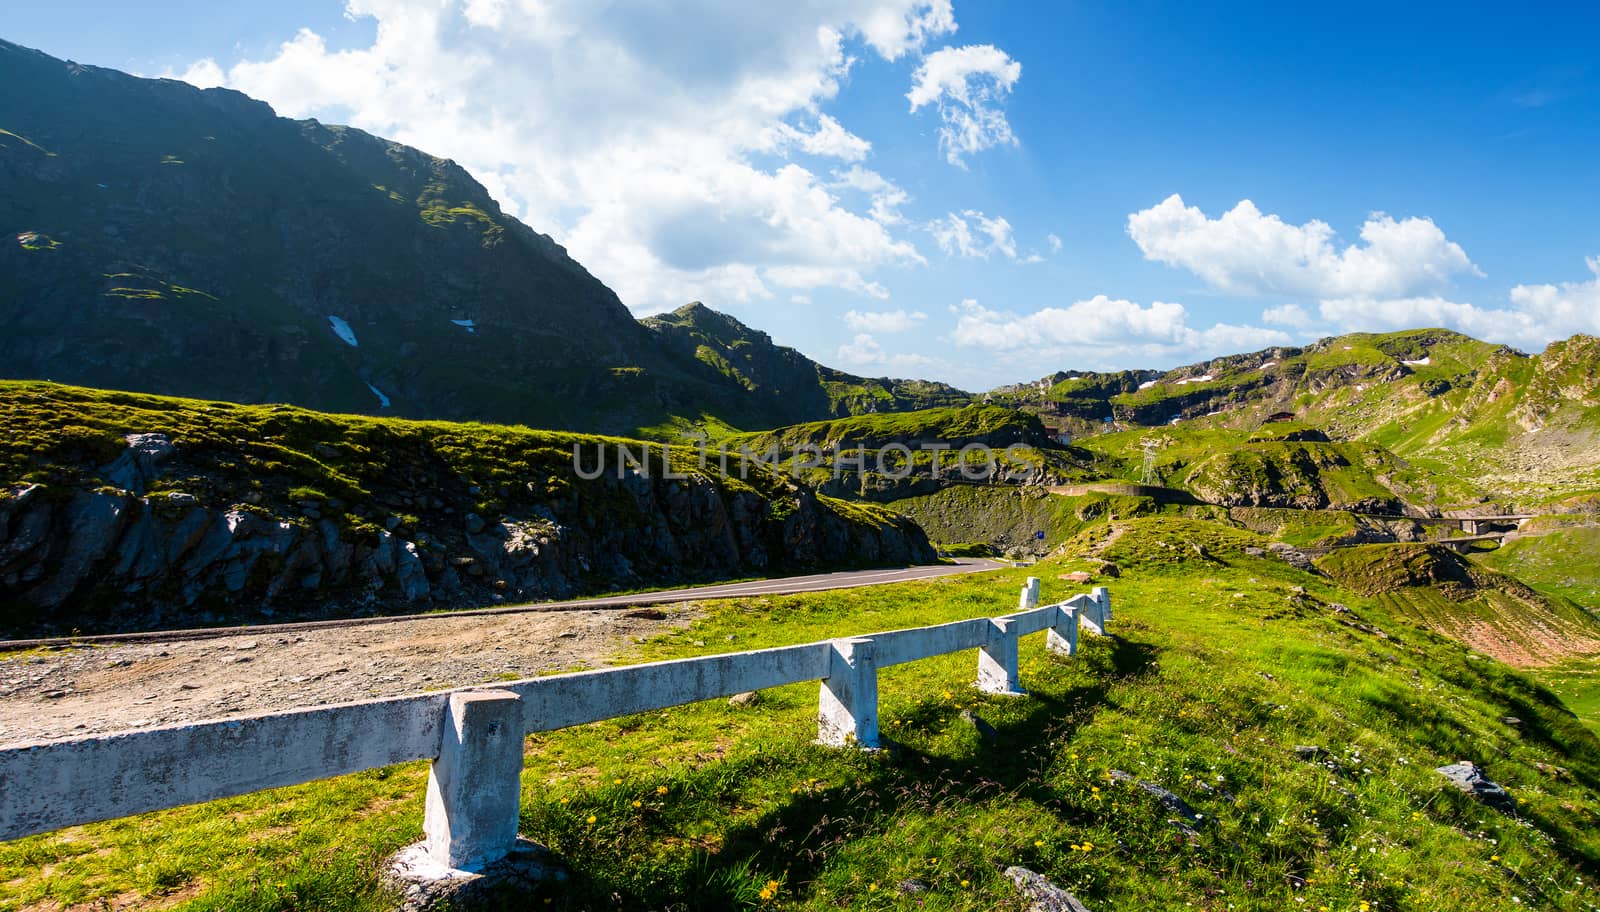 Transfagarasan road up hill to the mountain top by Pellinni